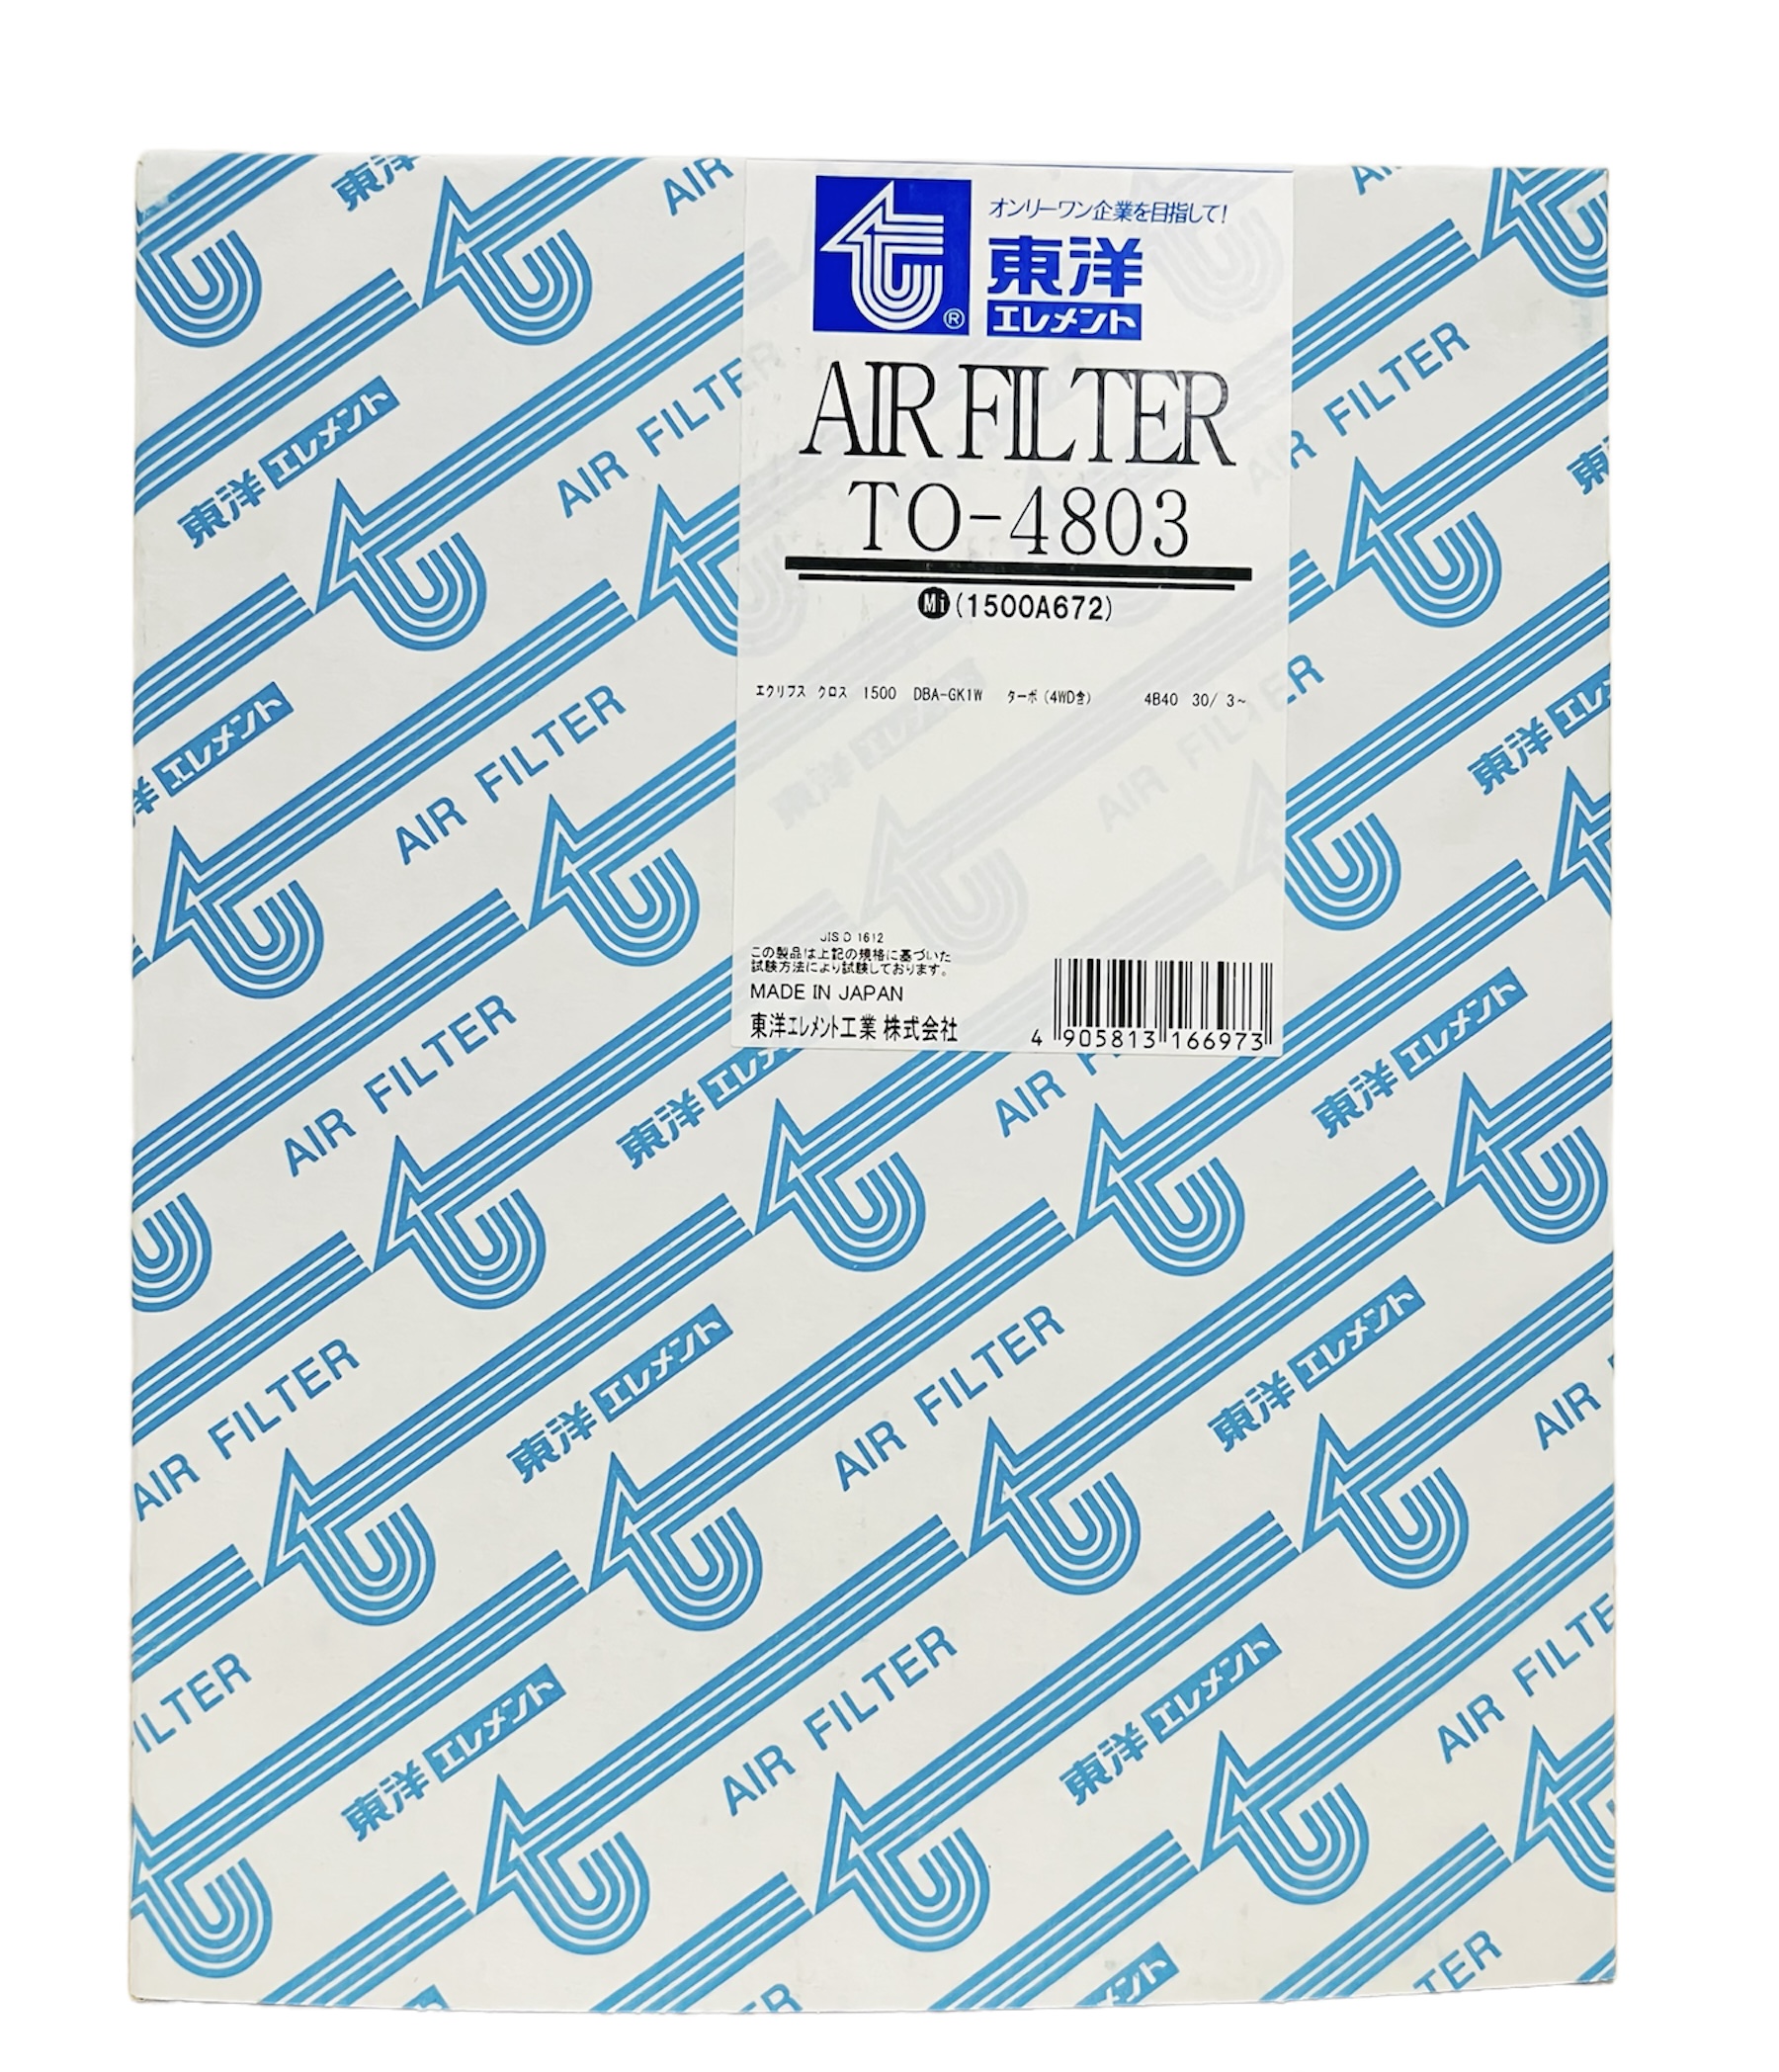 Air Filter TO-4803